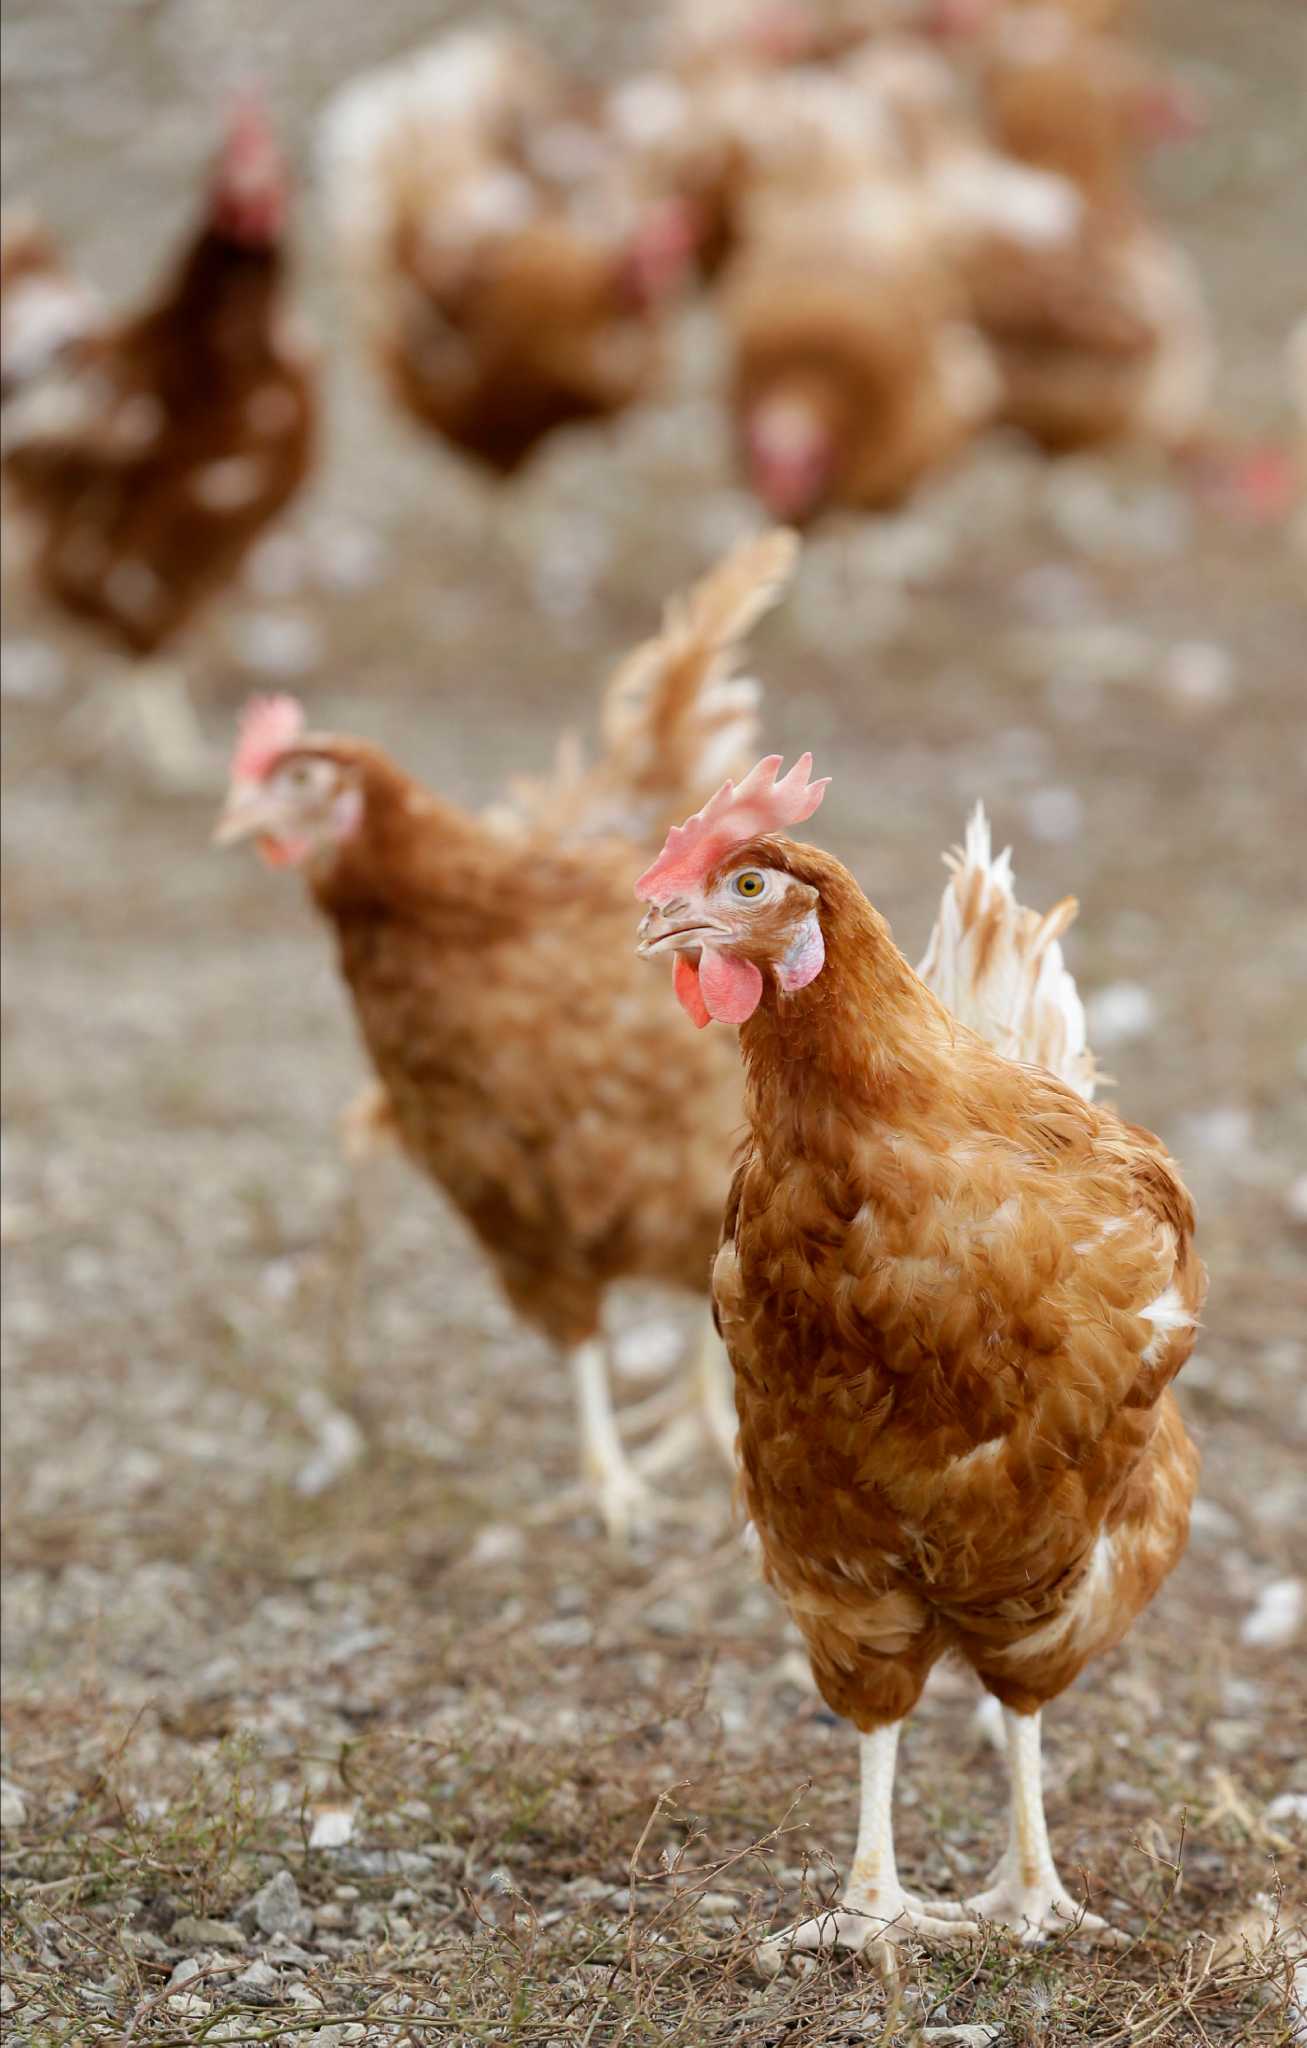 What are some associated costs with a chicken ranch?